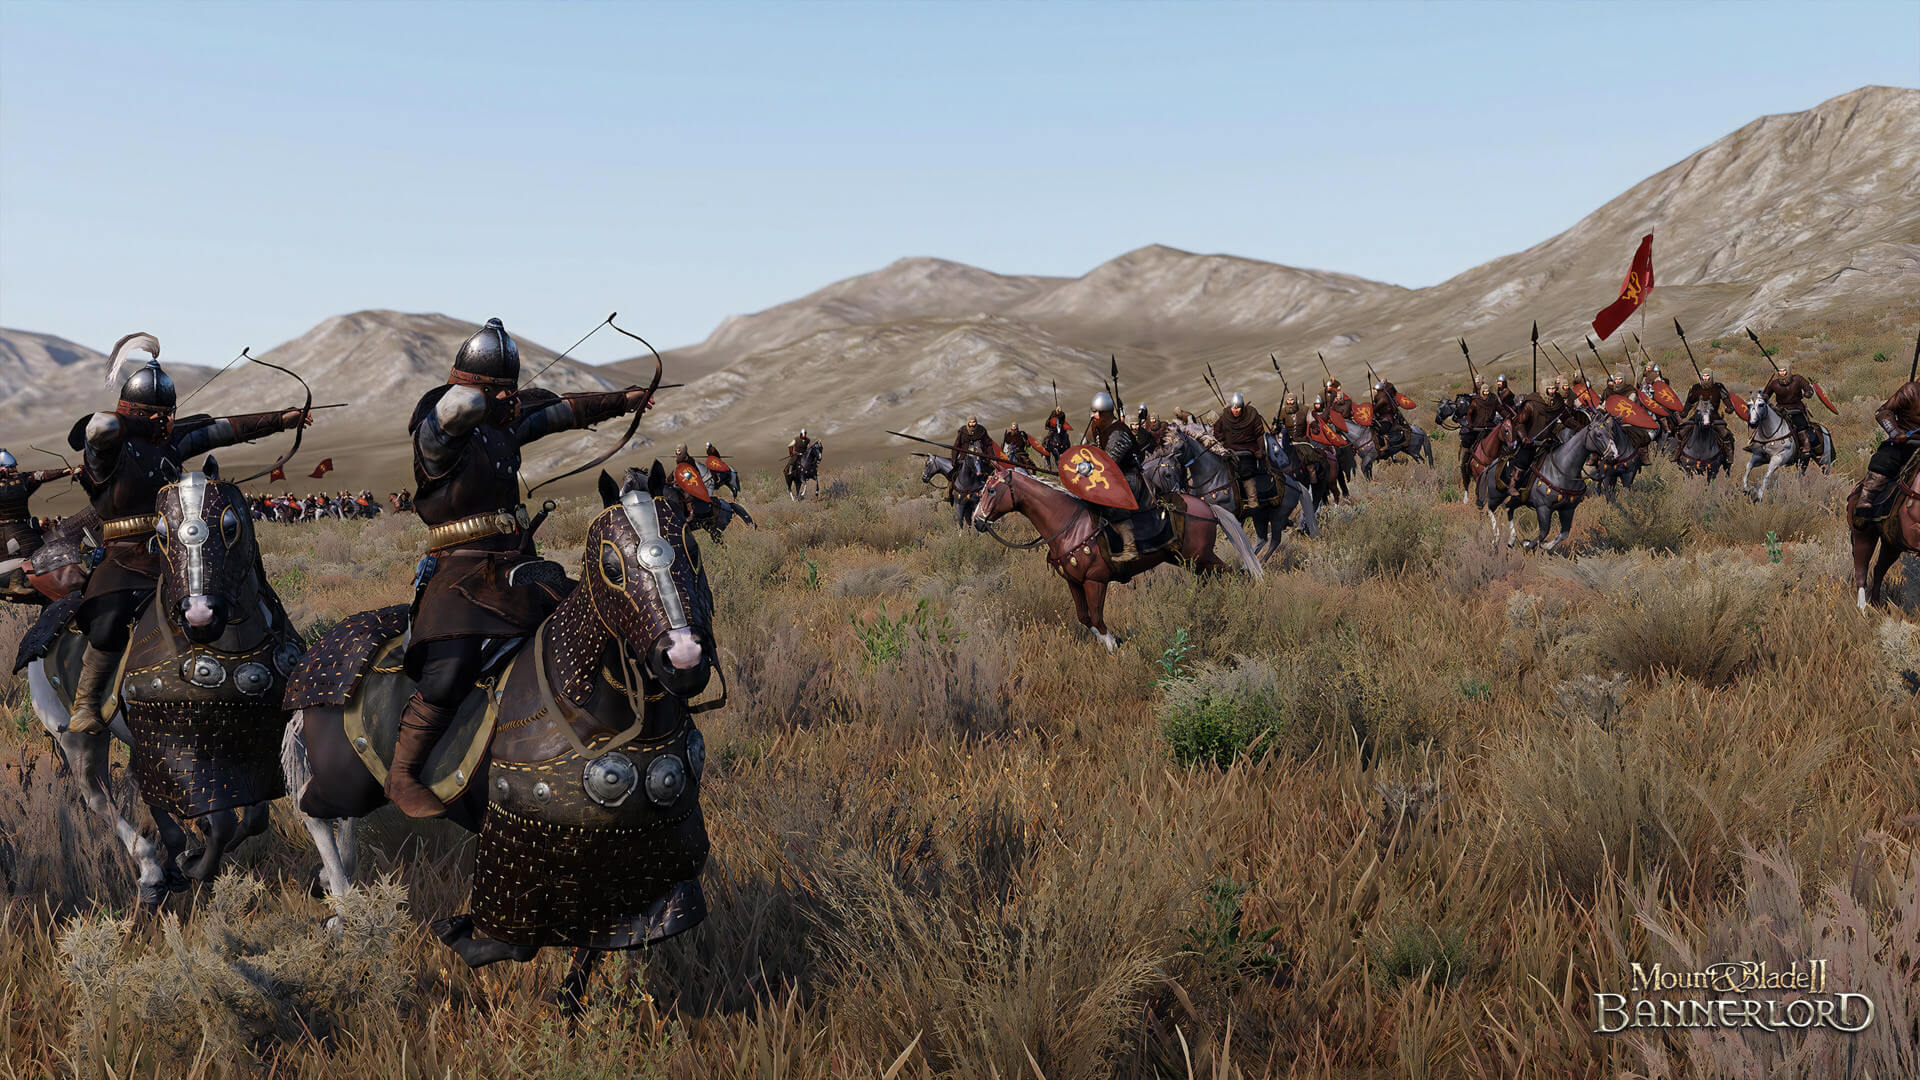 Archers aiming at melee combatants in Bannerlord, which is due on Game Pass next week